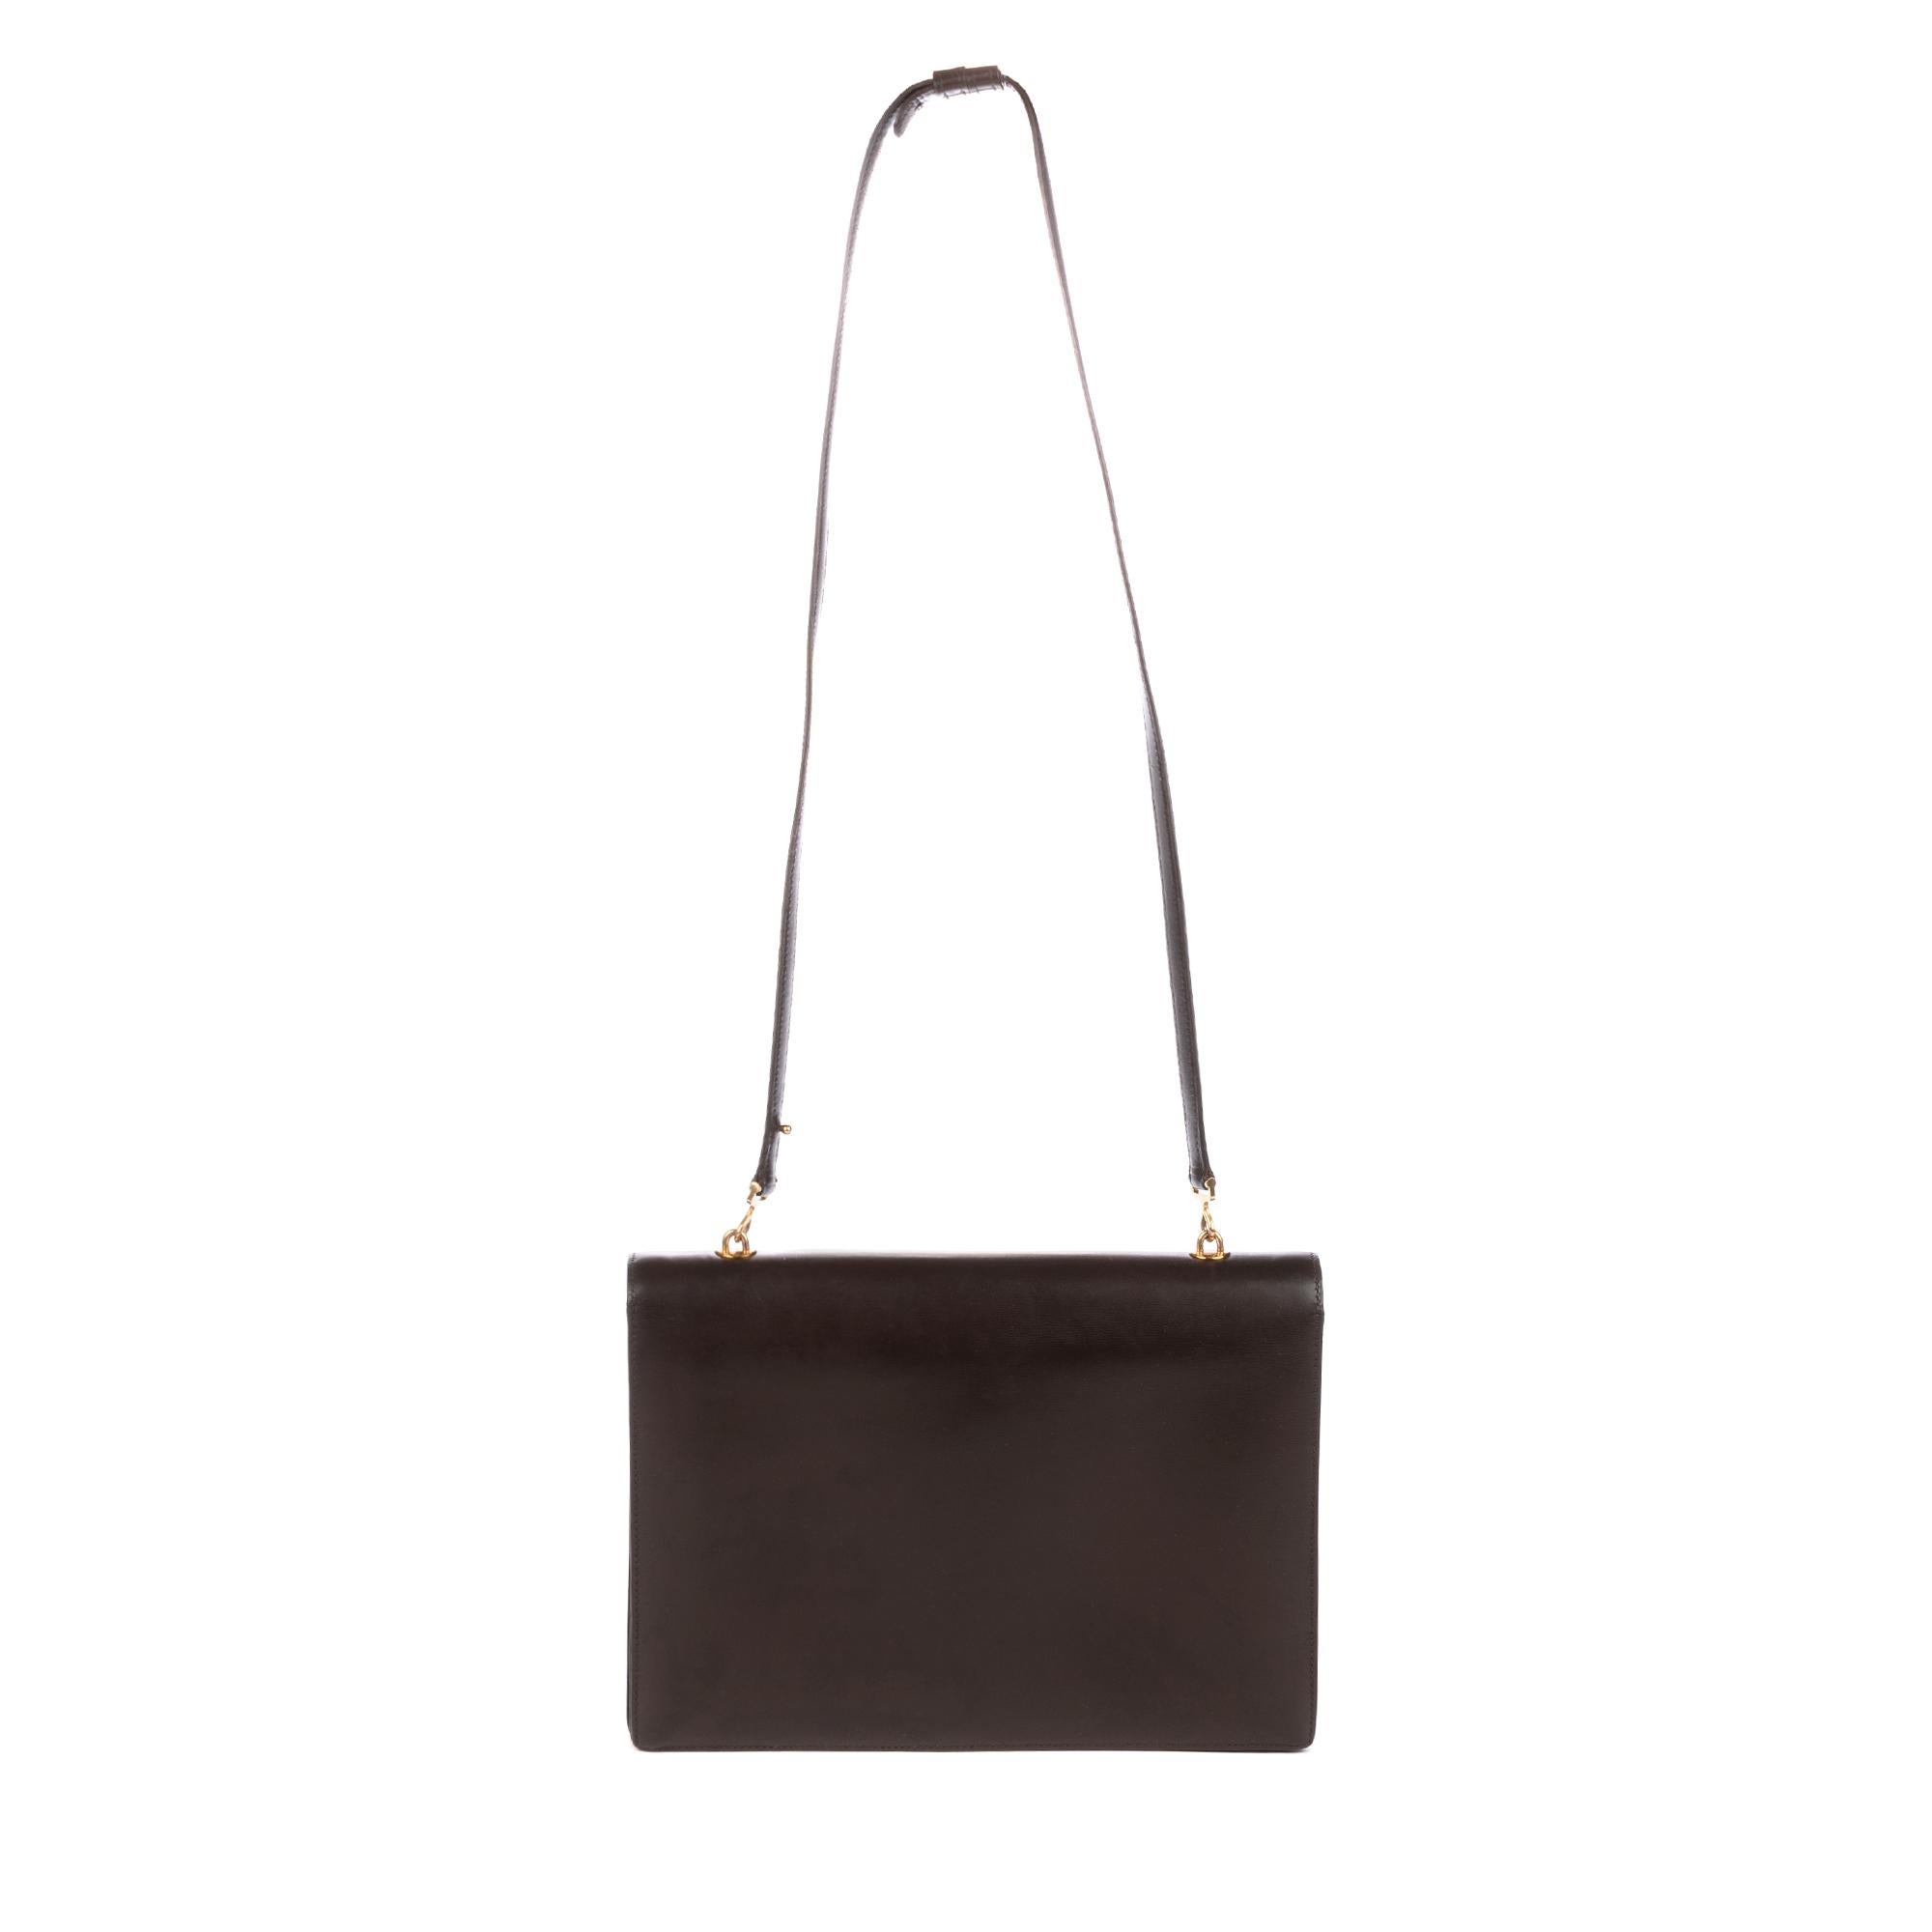 Hermès crossbody bag Brown box leather , gold metal Hardware, shoulder strap in brown box leather for shoulder or shoulder strap.  Flap closure.  Inner lining in brown leather, a snap closure pocket, a double patch pocket.  
Signature: 